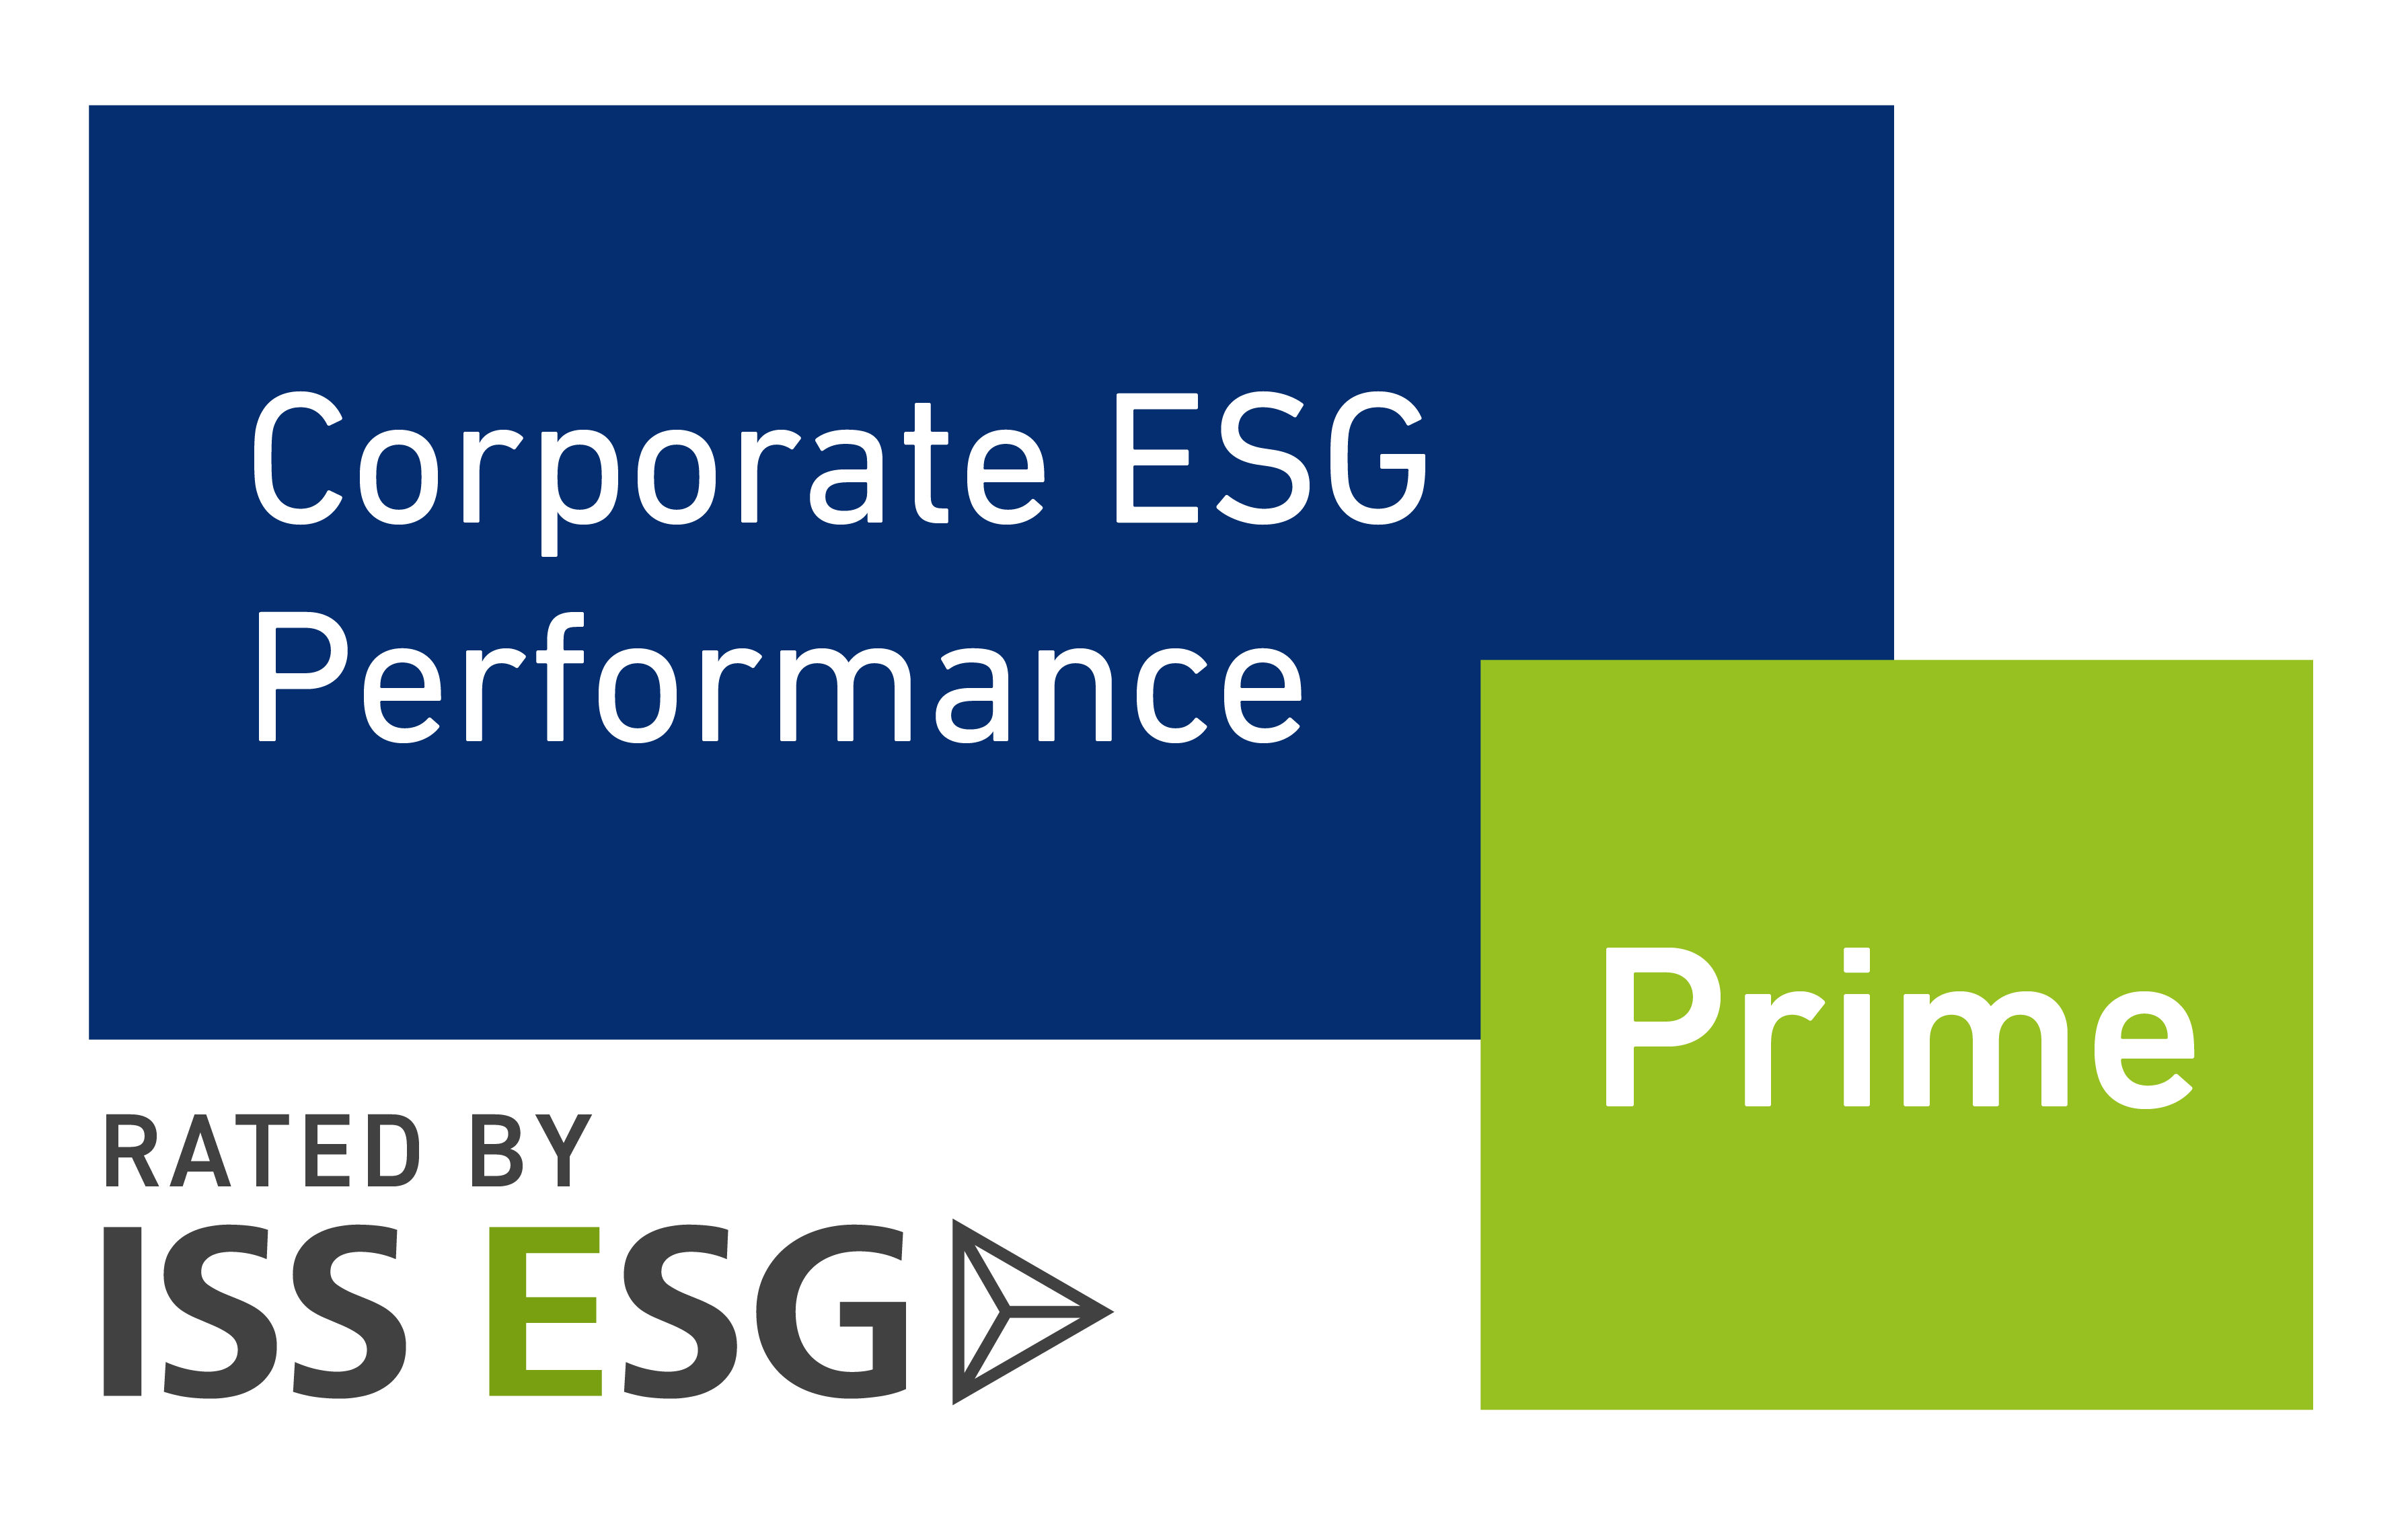 Corporate ESG Performance RATED BY ISS ESG Prime